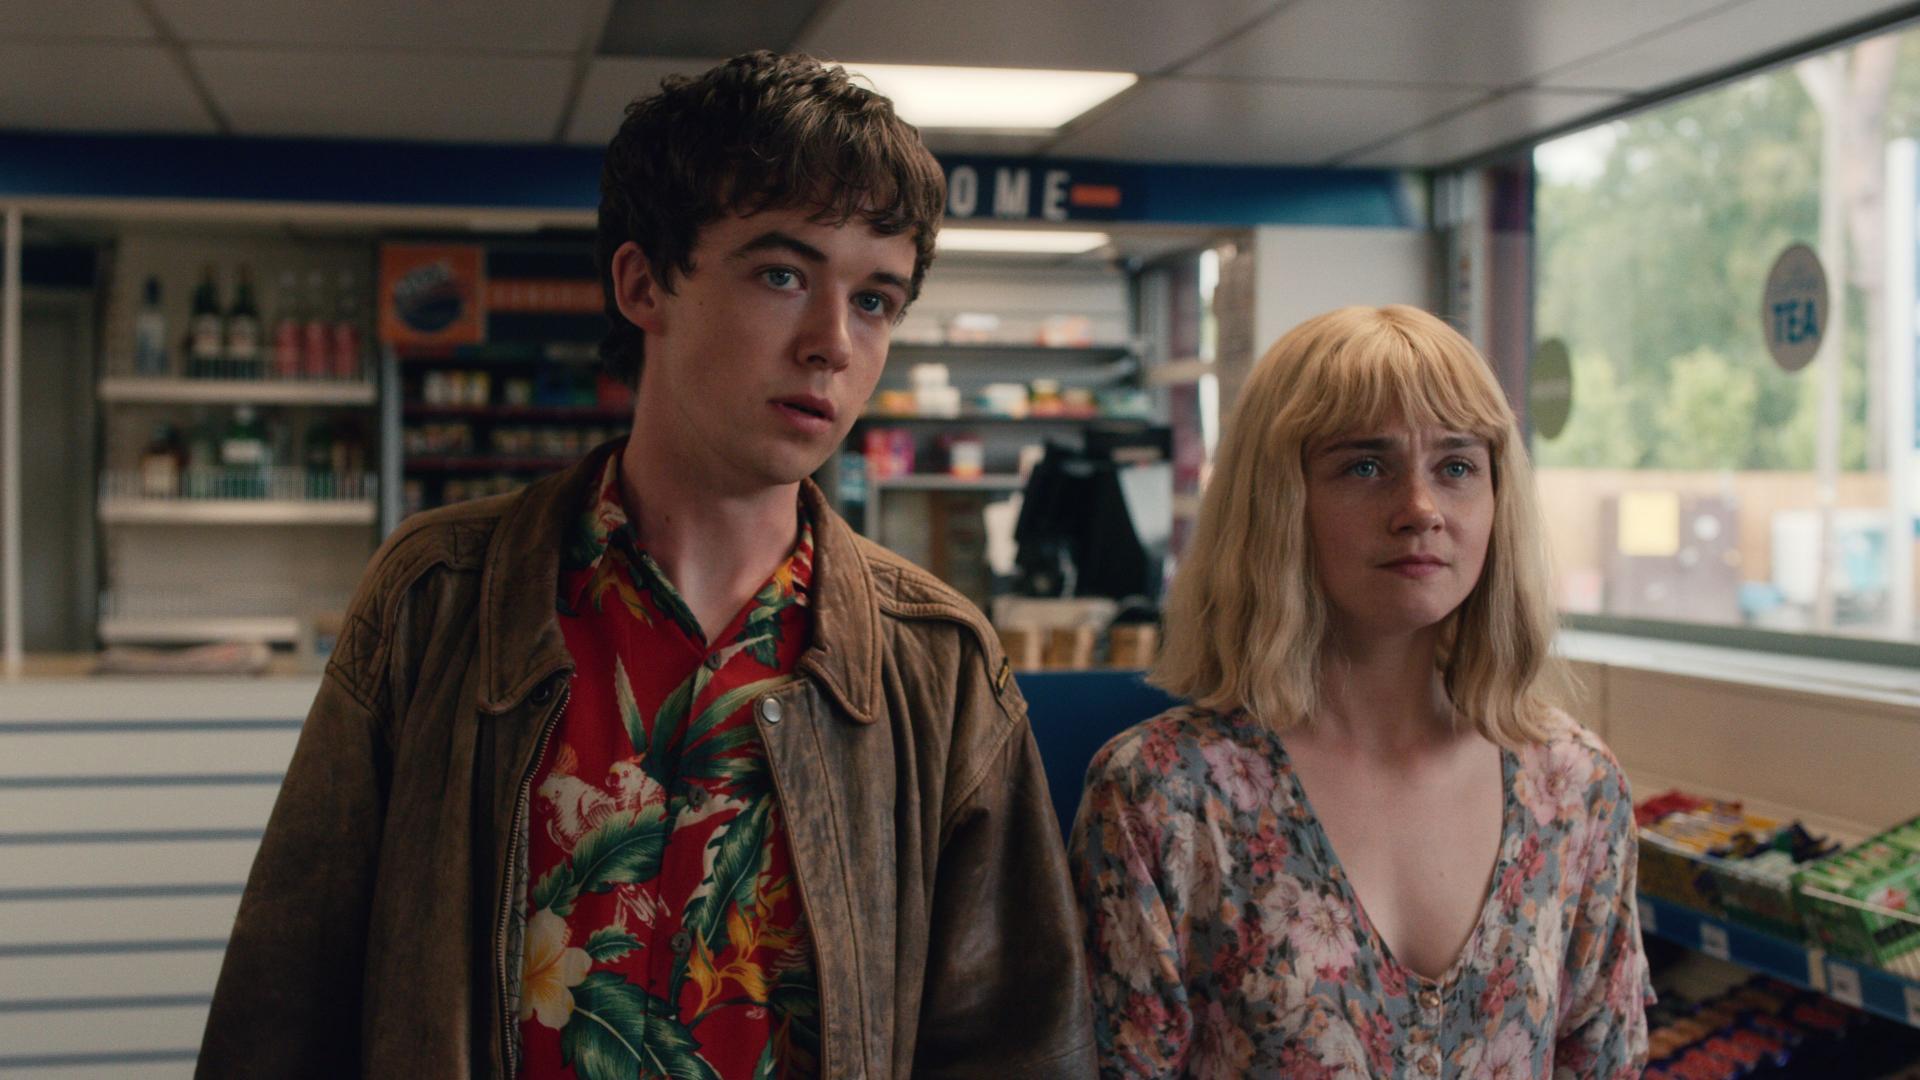 The End of the F***ing World TV Series